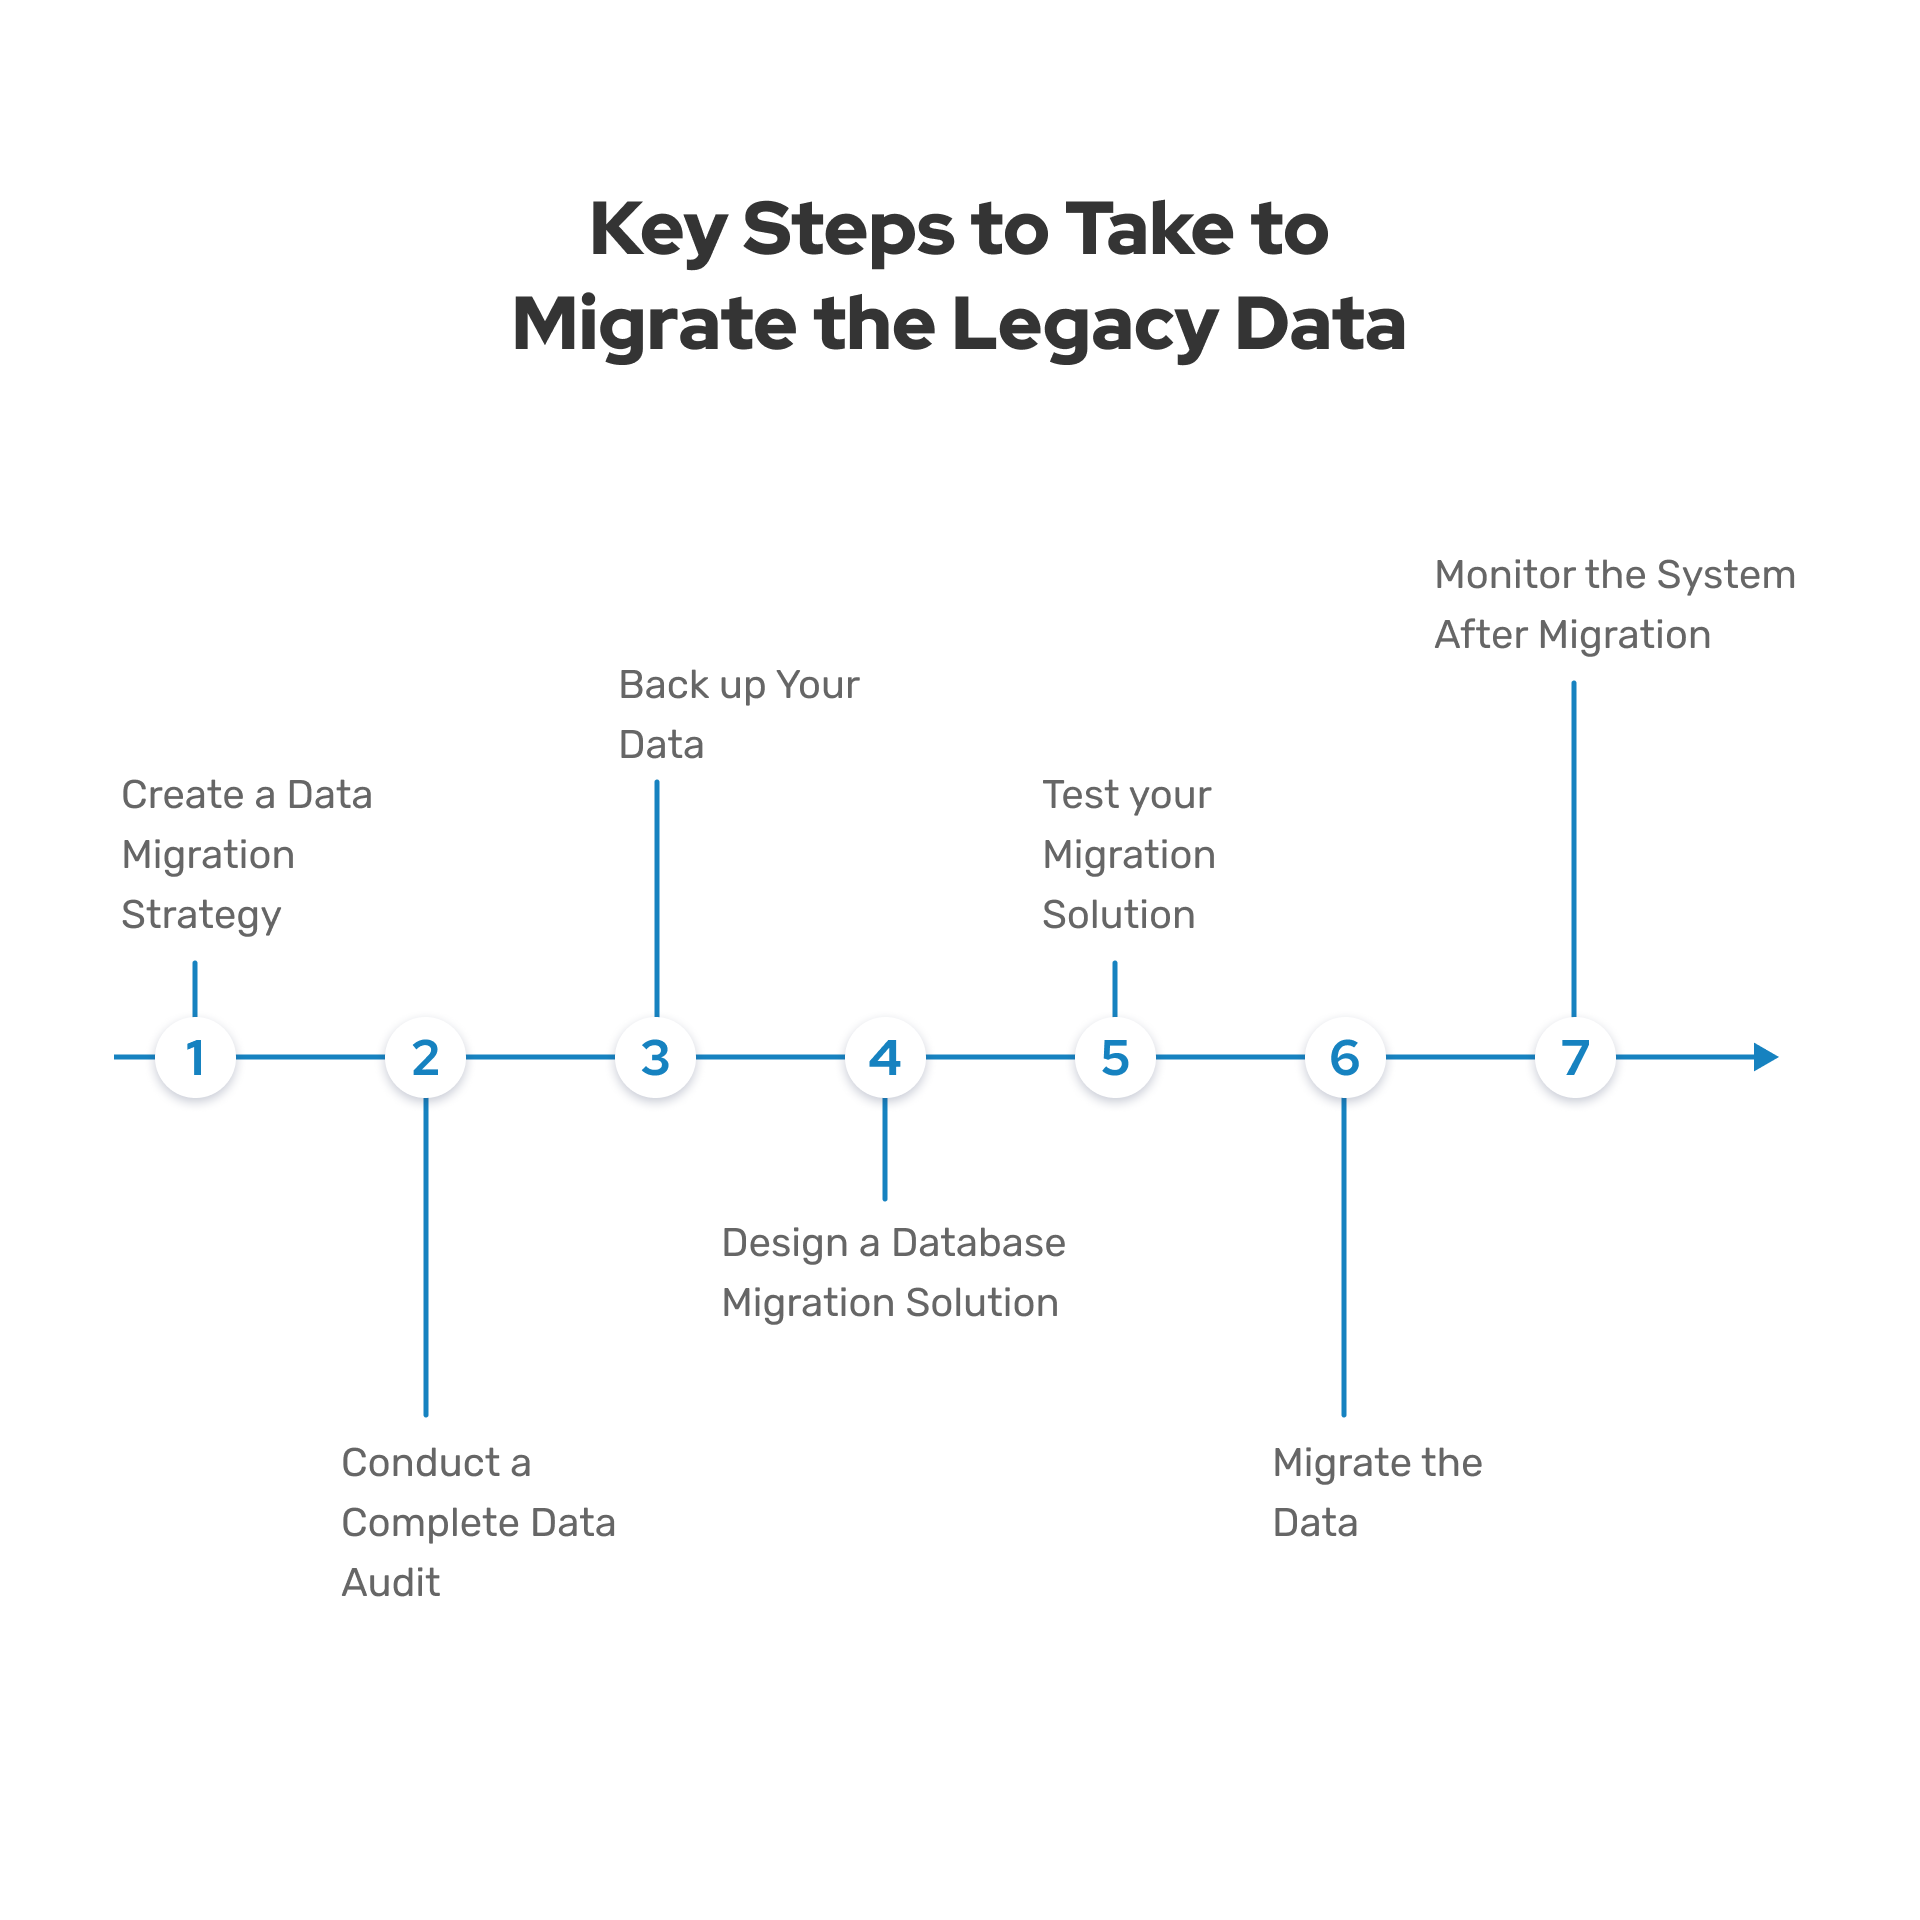 Careful planning, data audit and backup help ensure seamless and painless data migration.